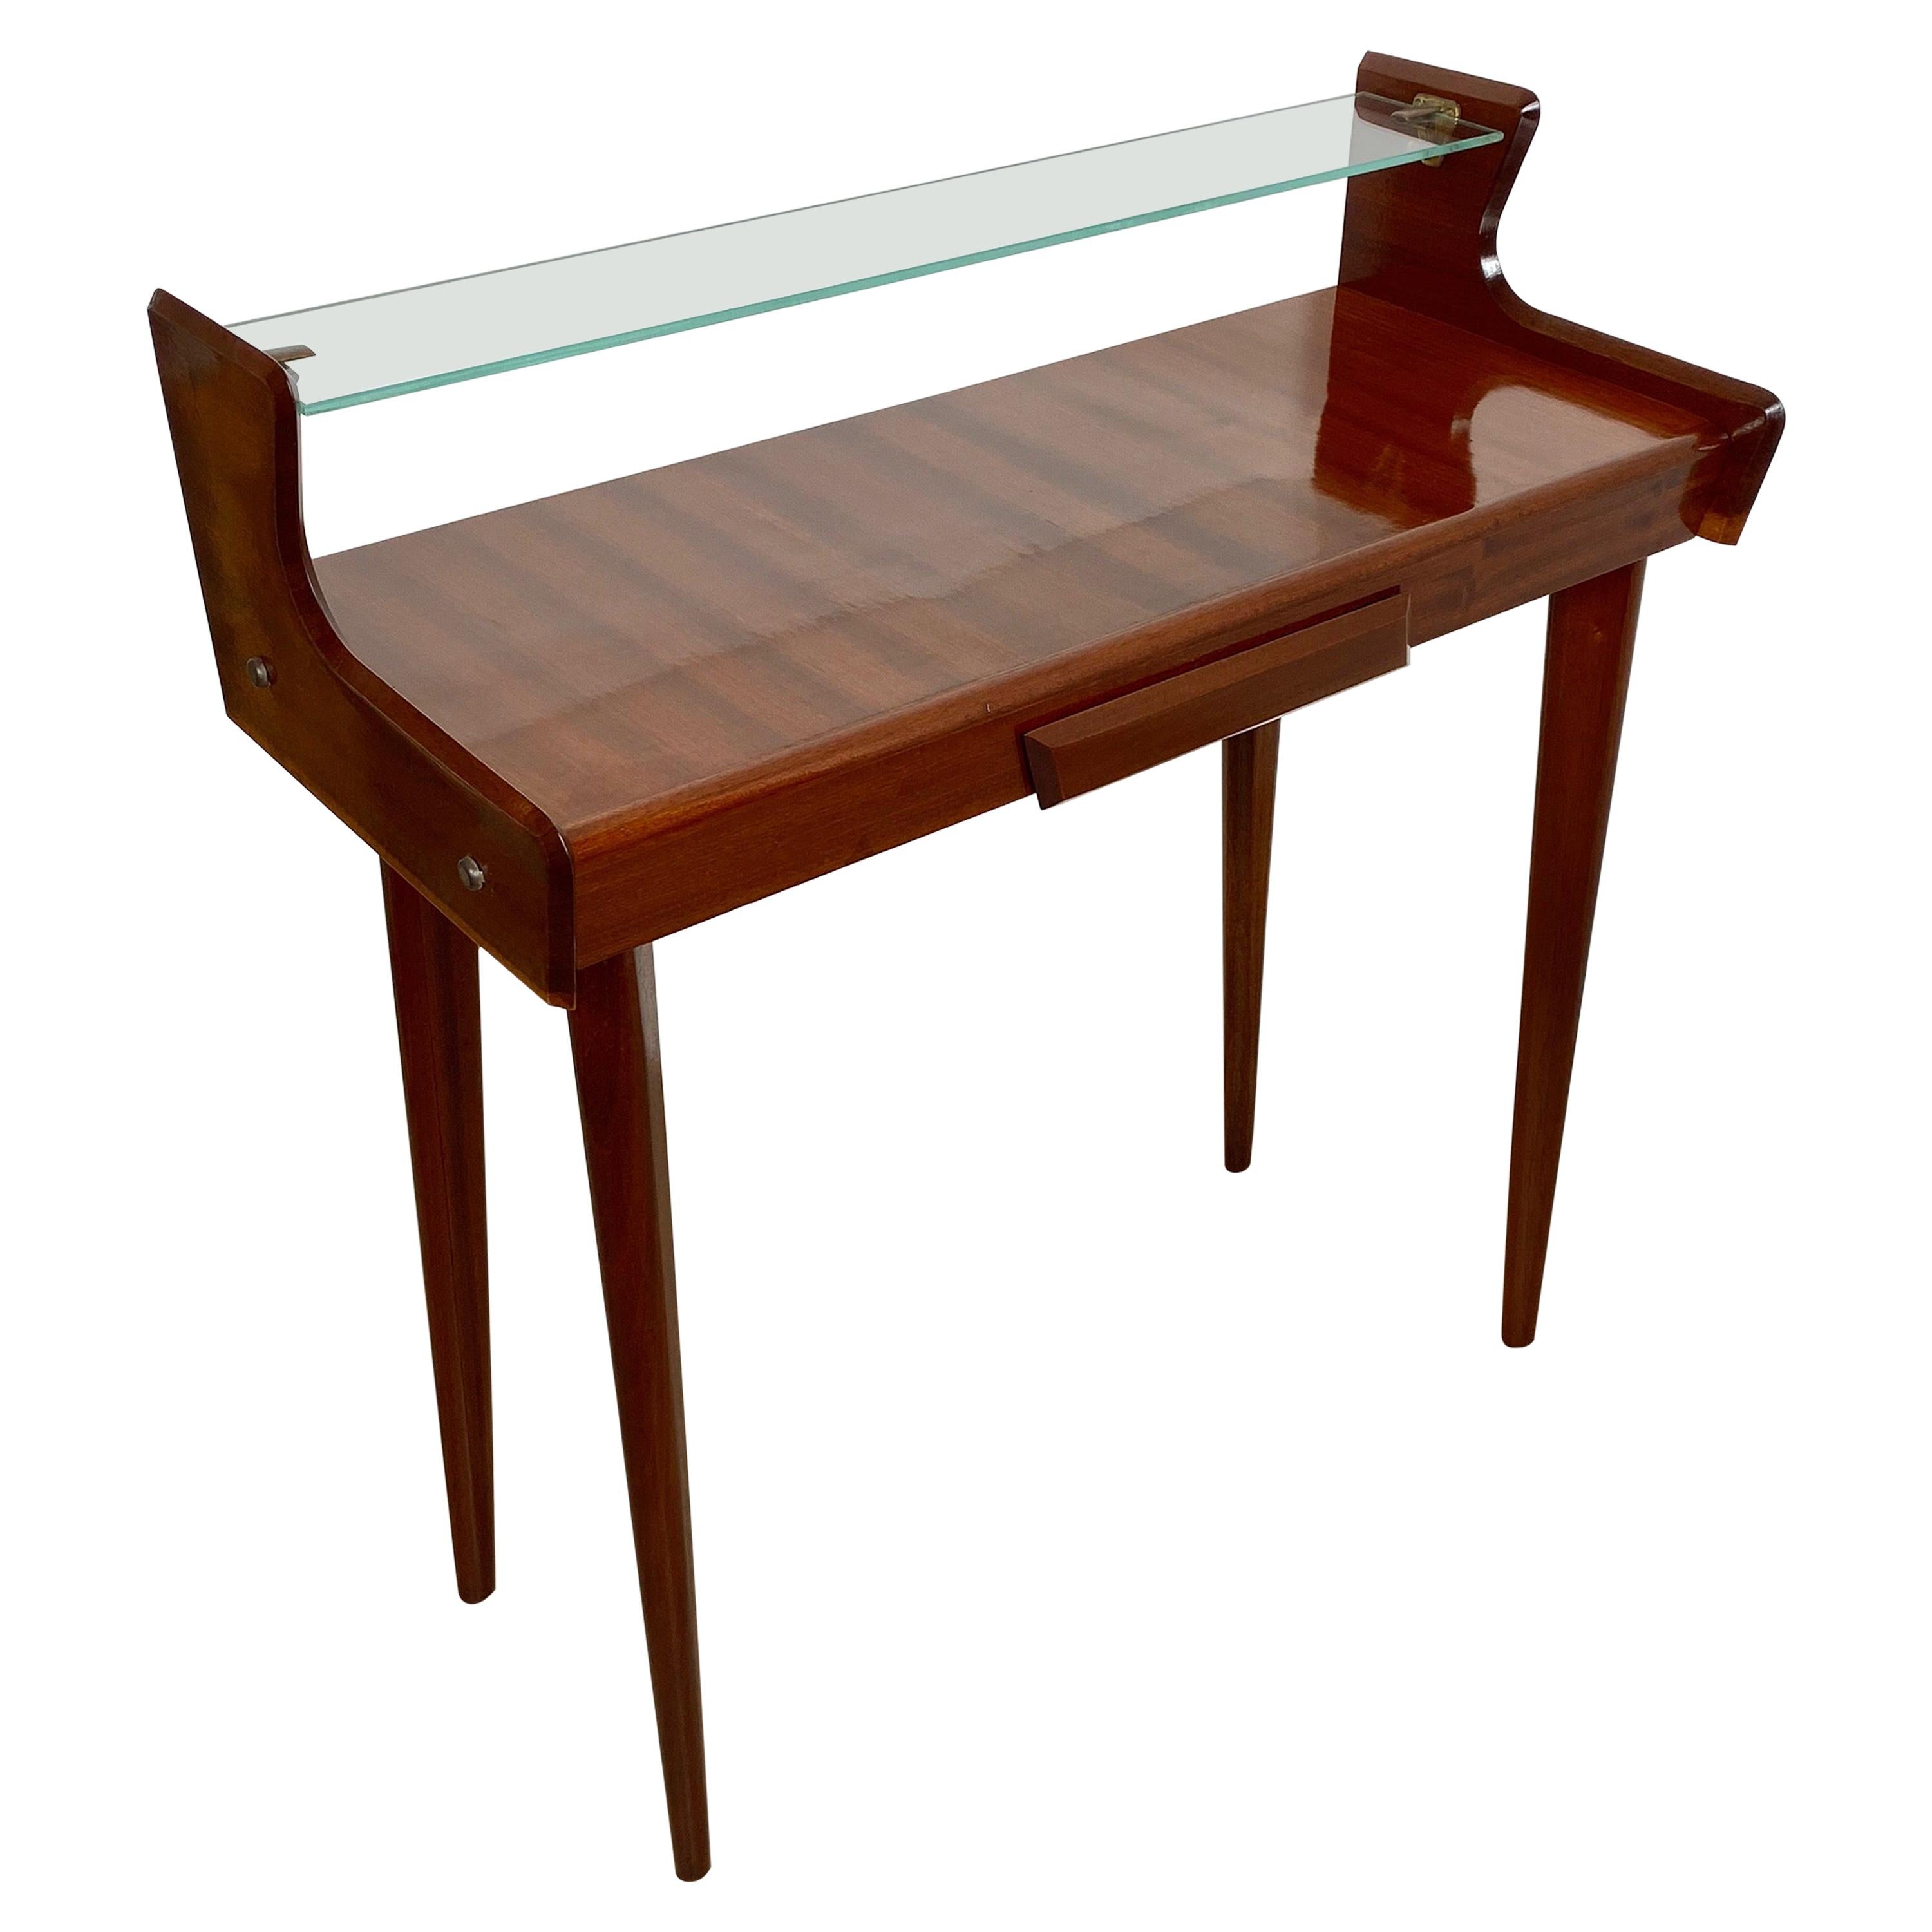 Italian Midcentury Mahogany Wood and Glass Console Table by Carlo de Carli 1950s For Sale